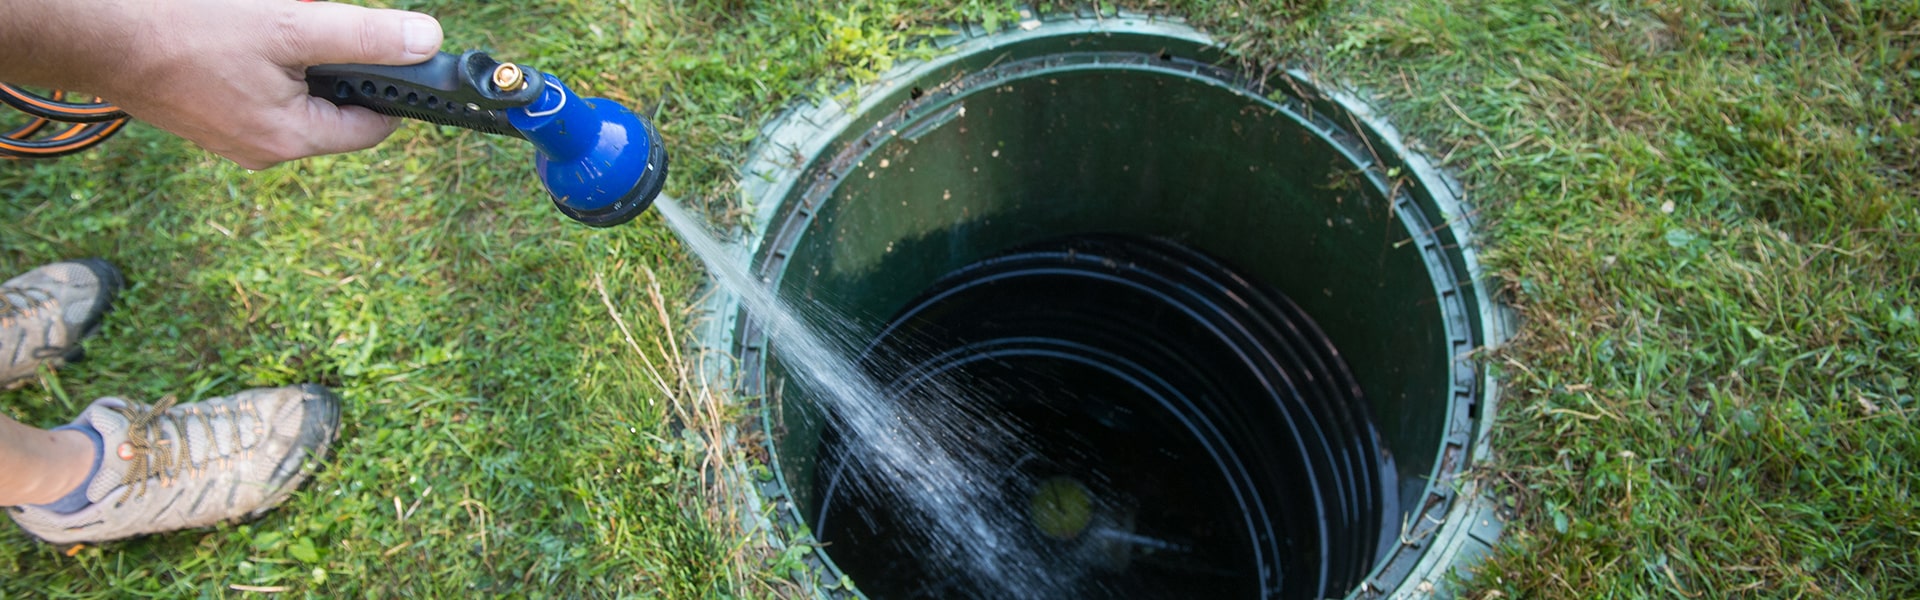 5 Signs Your Septic System Needs Professional Cleaning Services